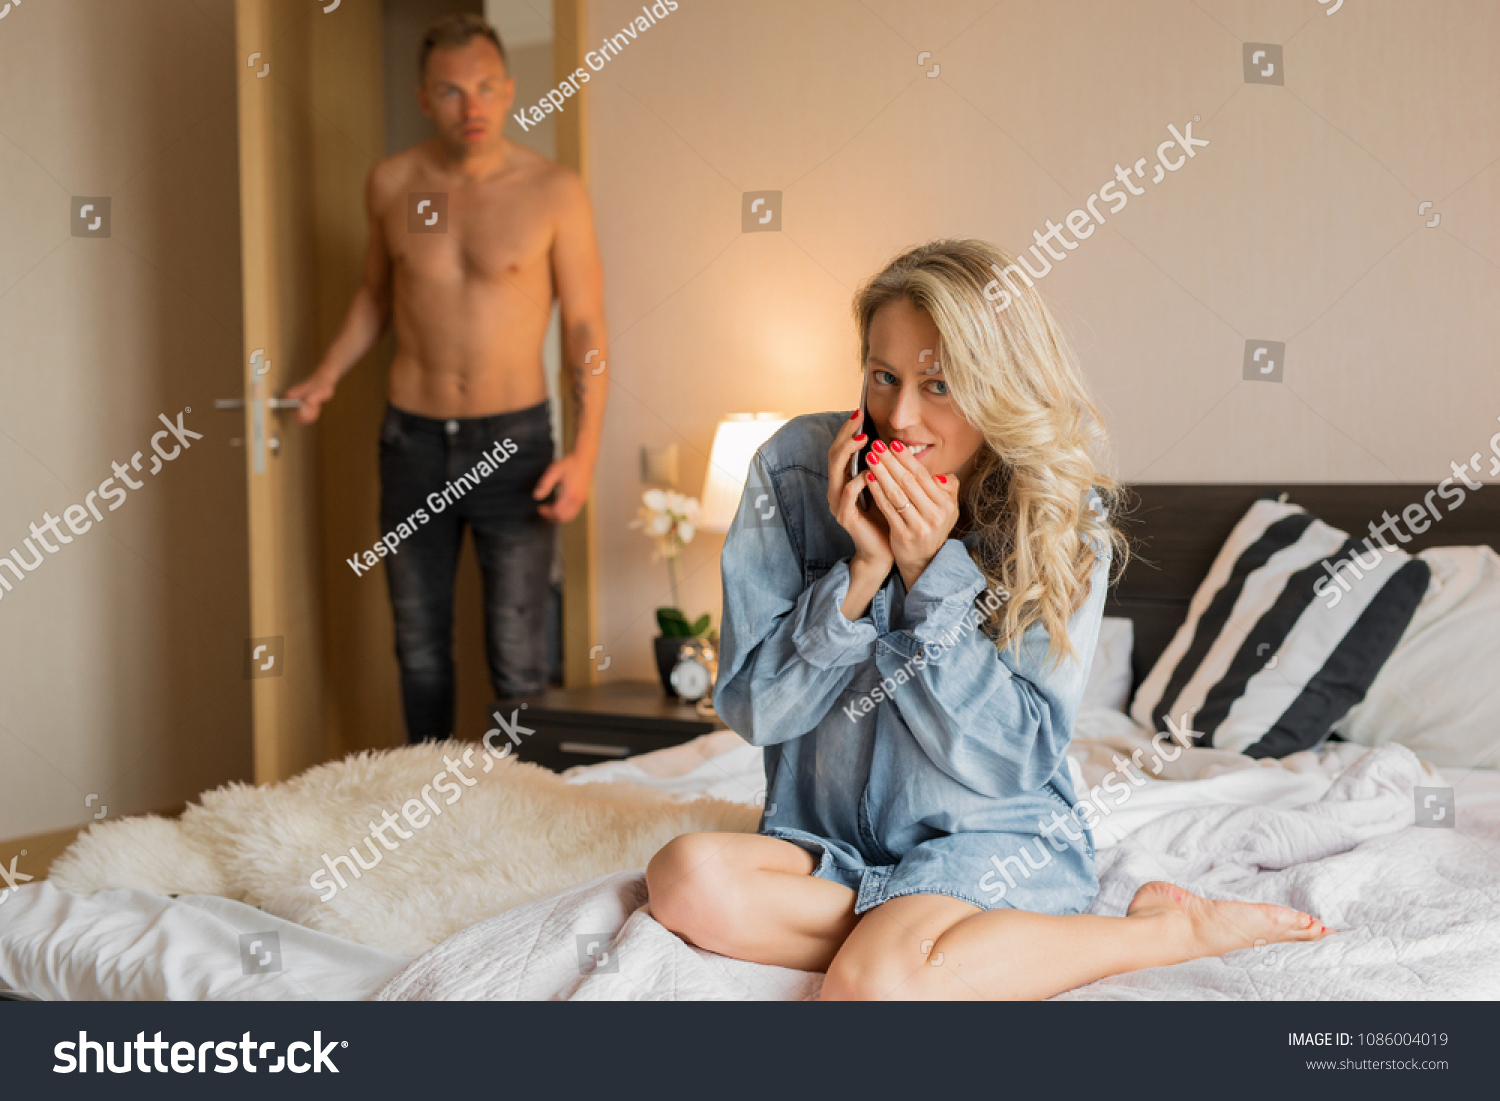 Caught husband cheating by 7 Things